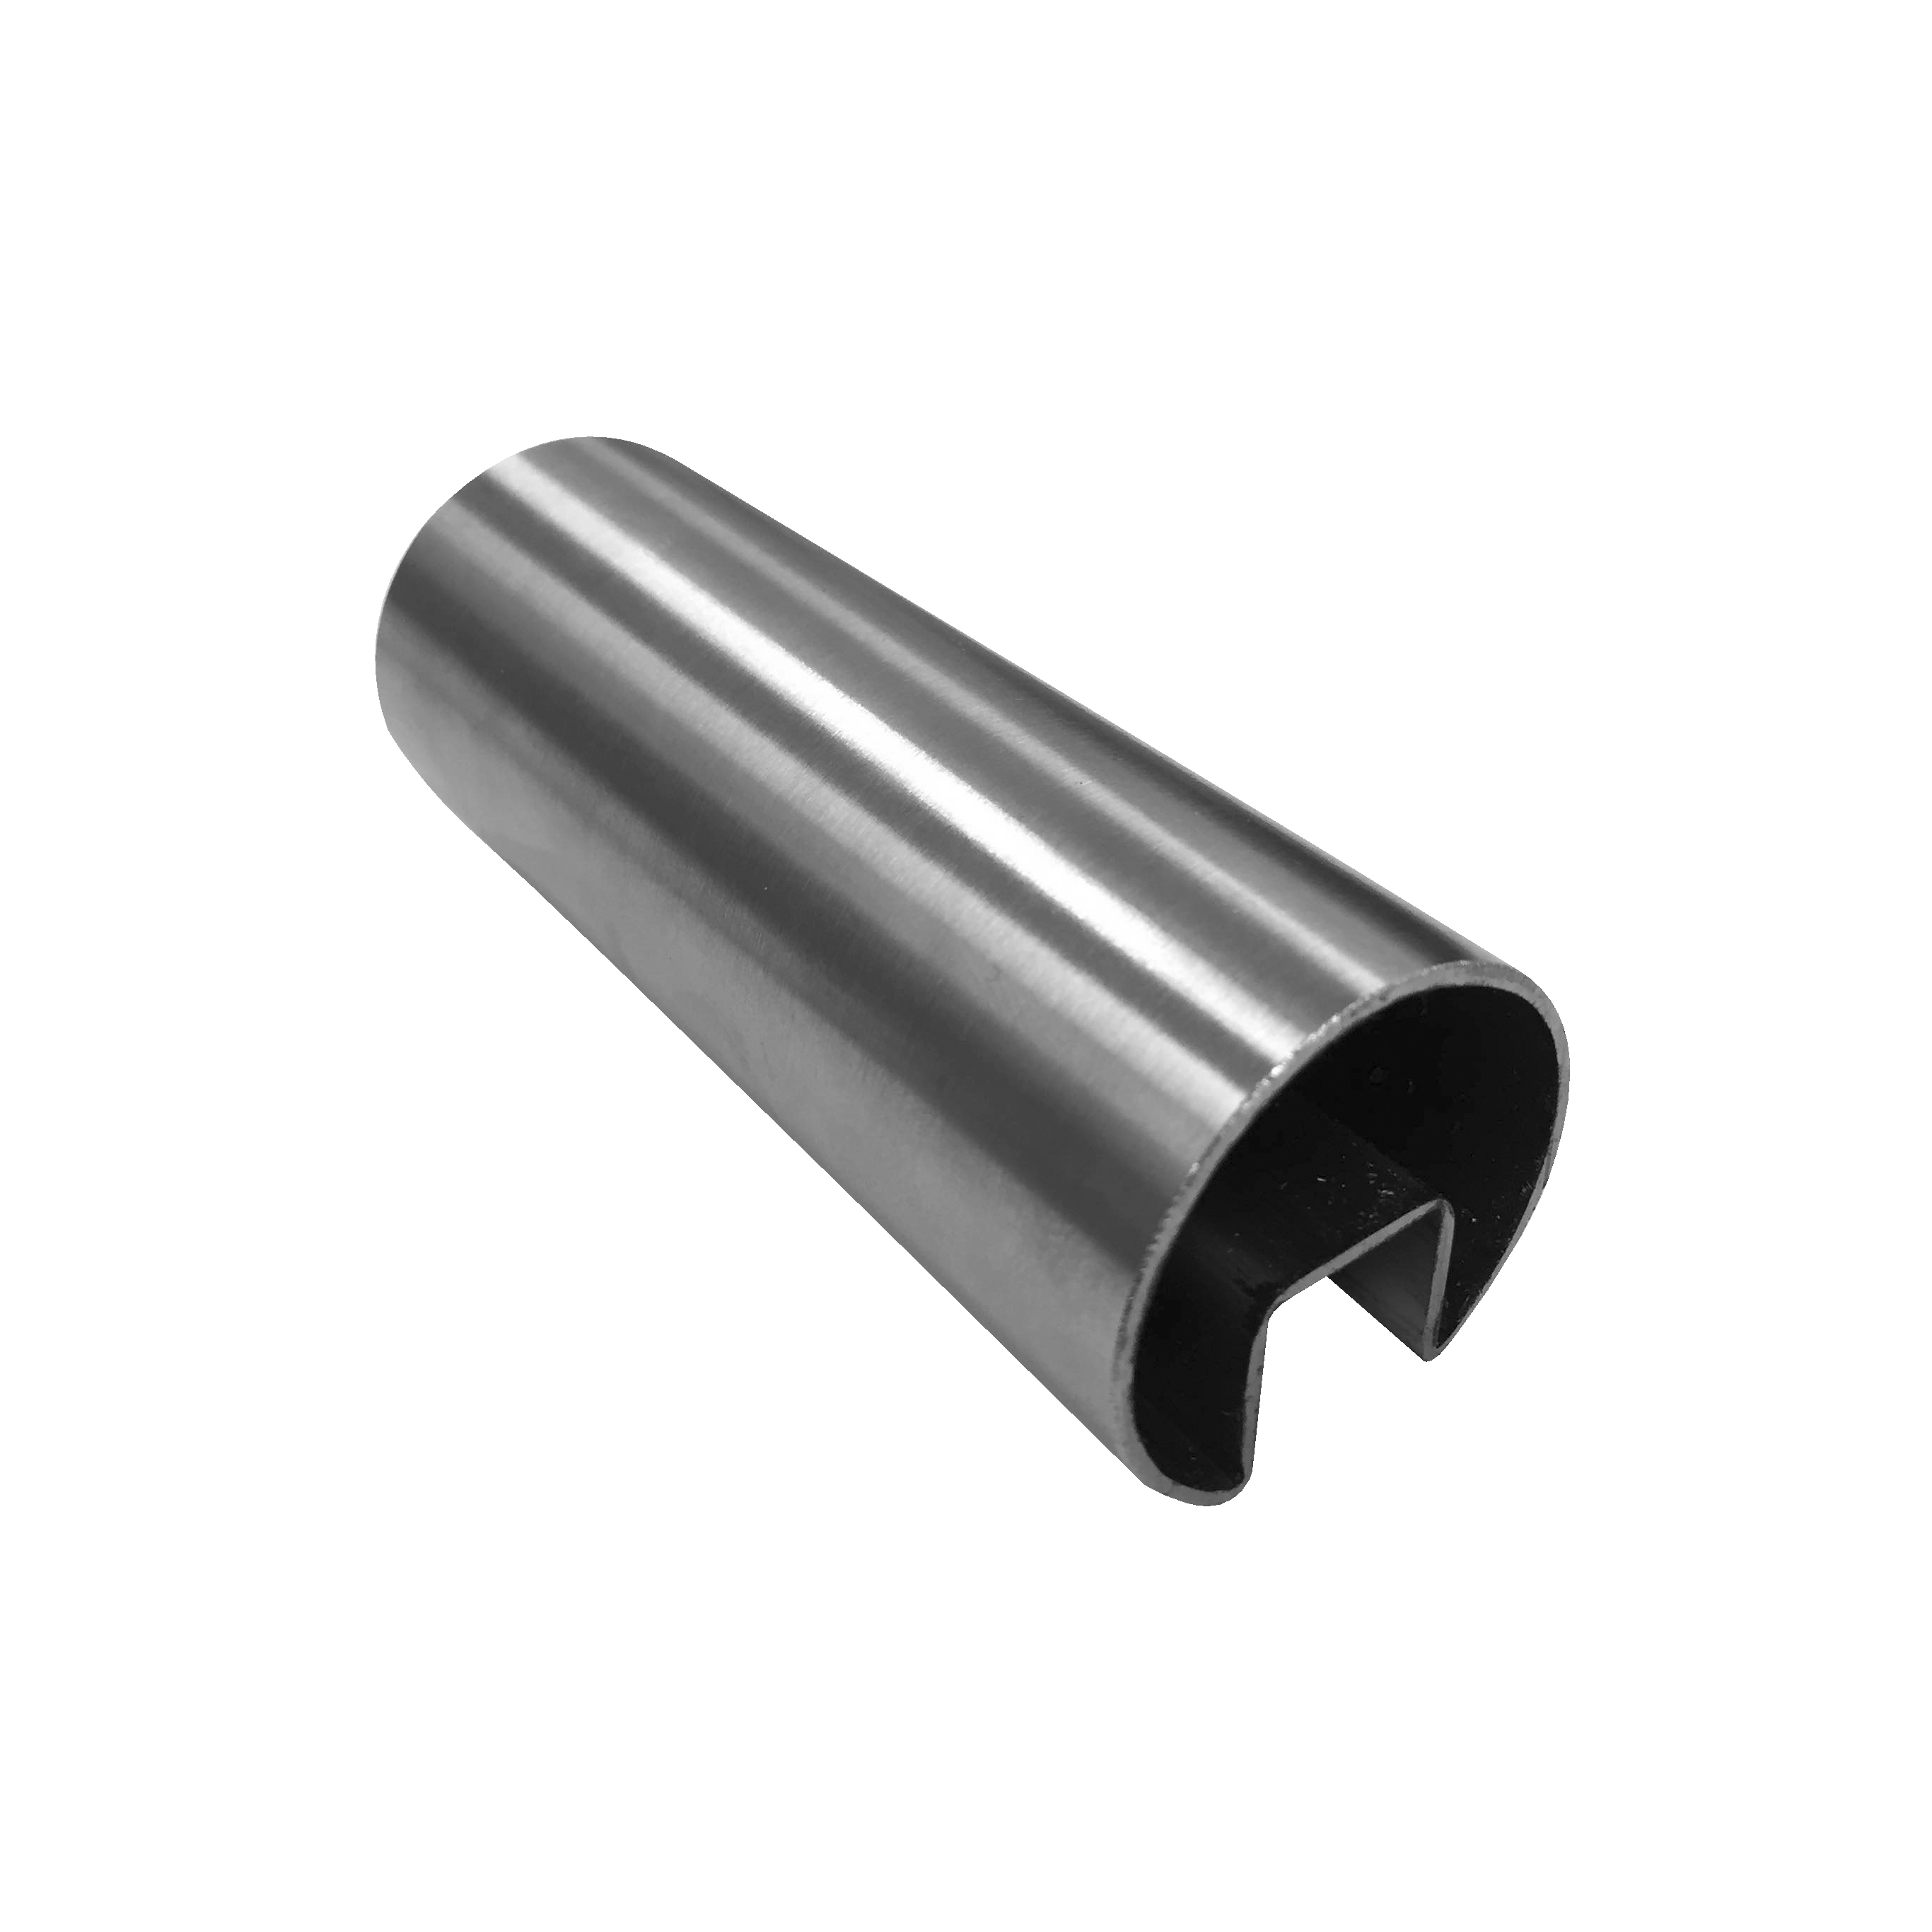 Tube Slotted 38mm Stainless Steel 5800mm - Satin